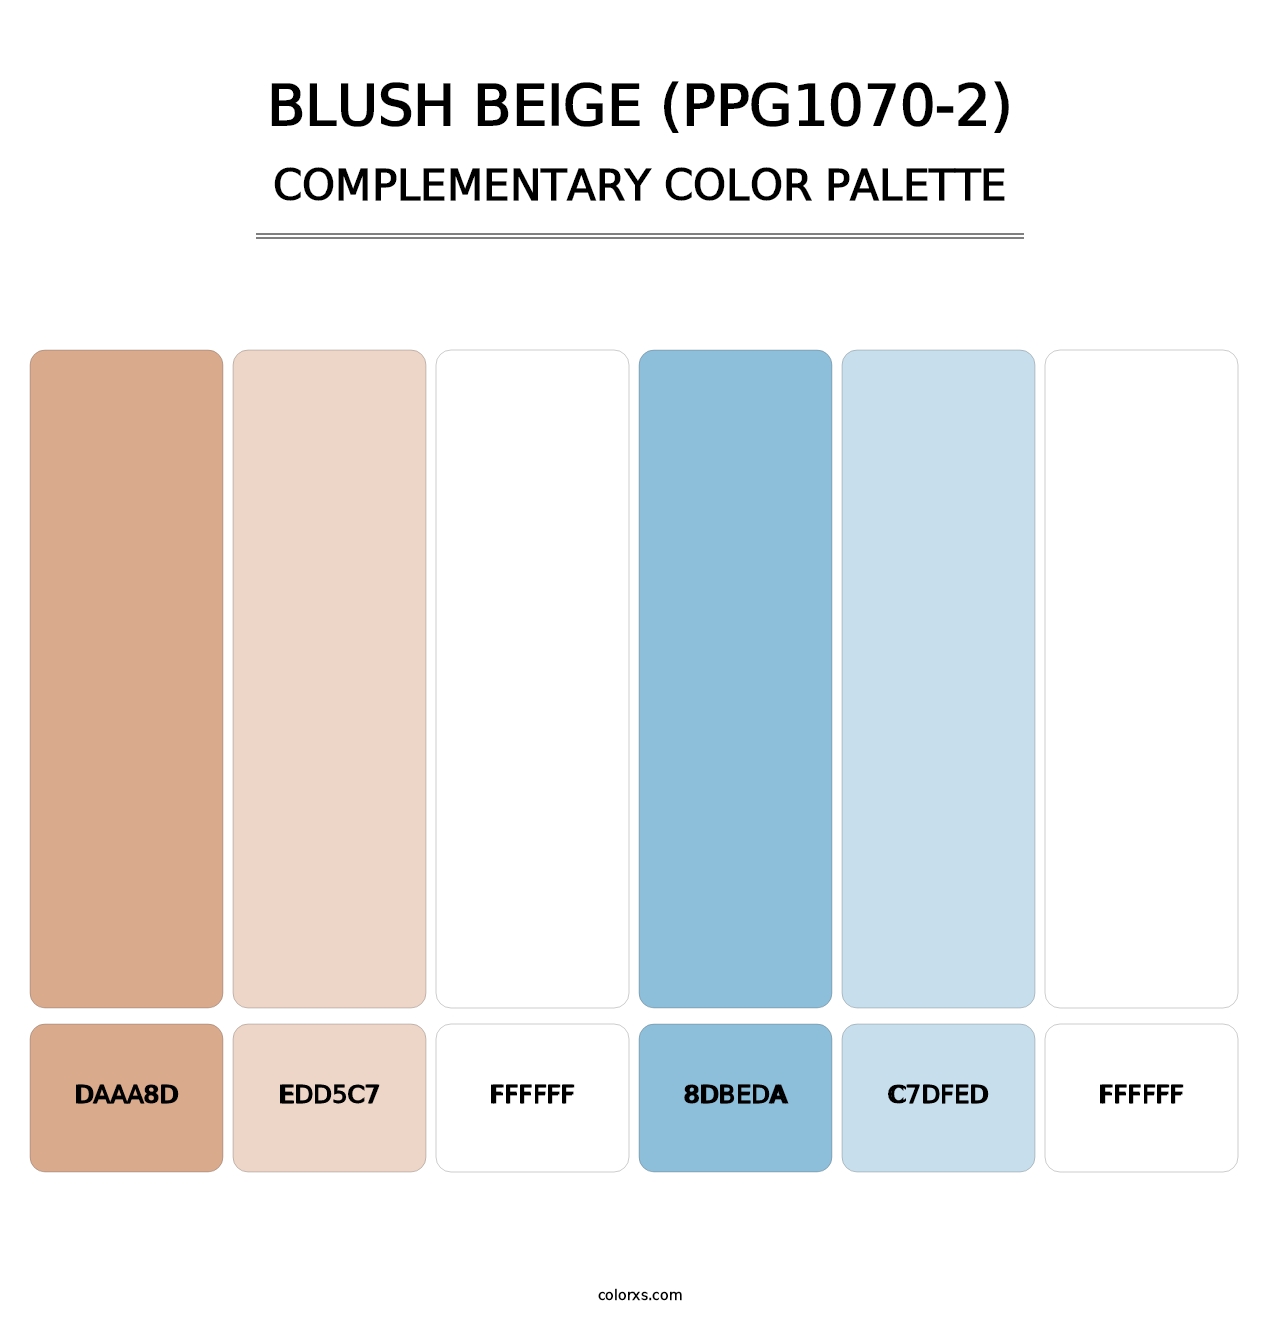 Blush Beige (PPG1070-2) - Complementary Color Palette